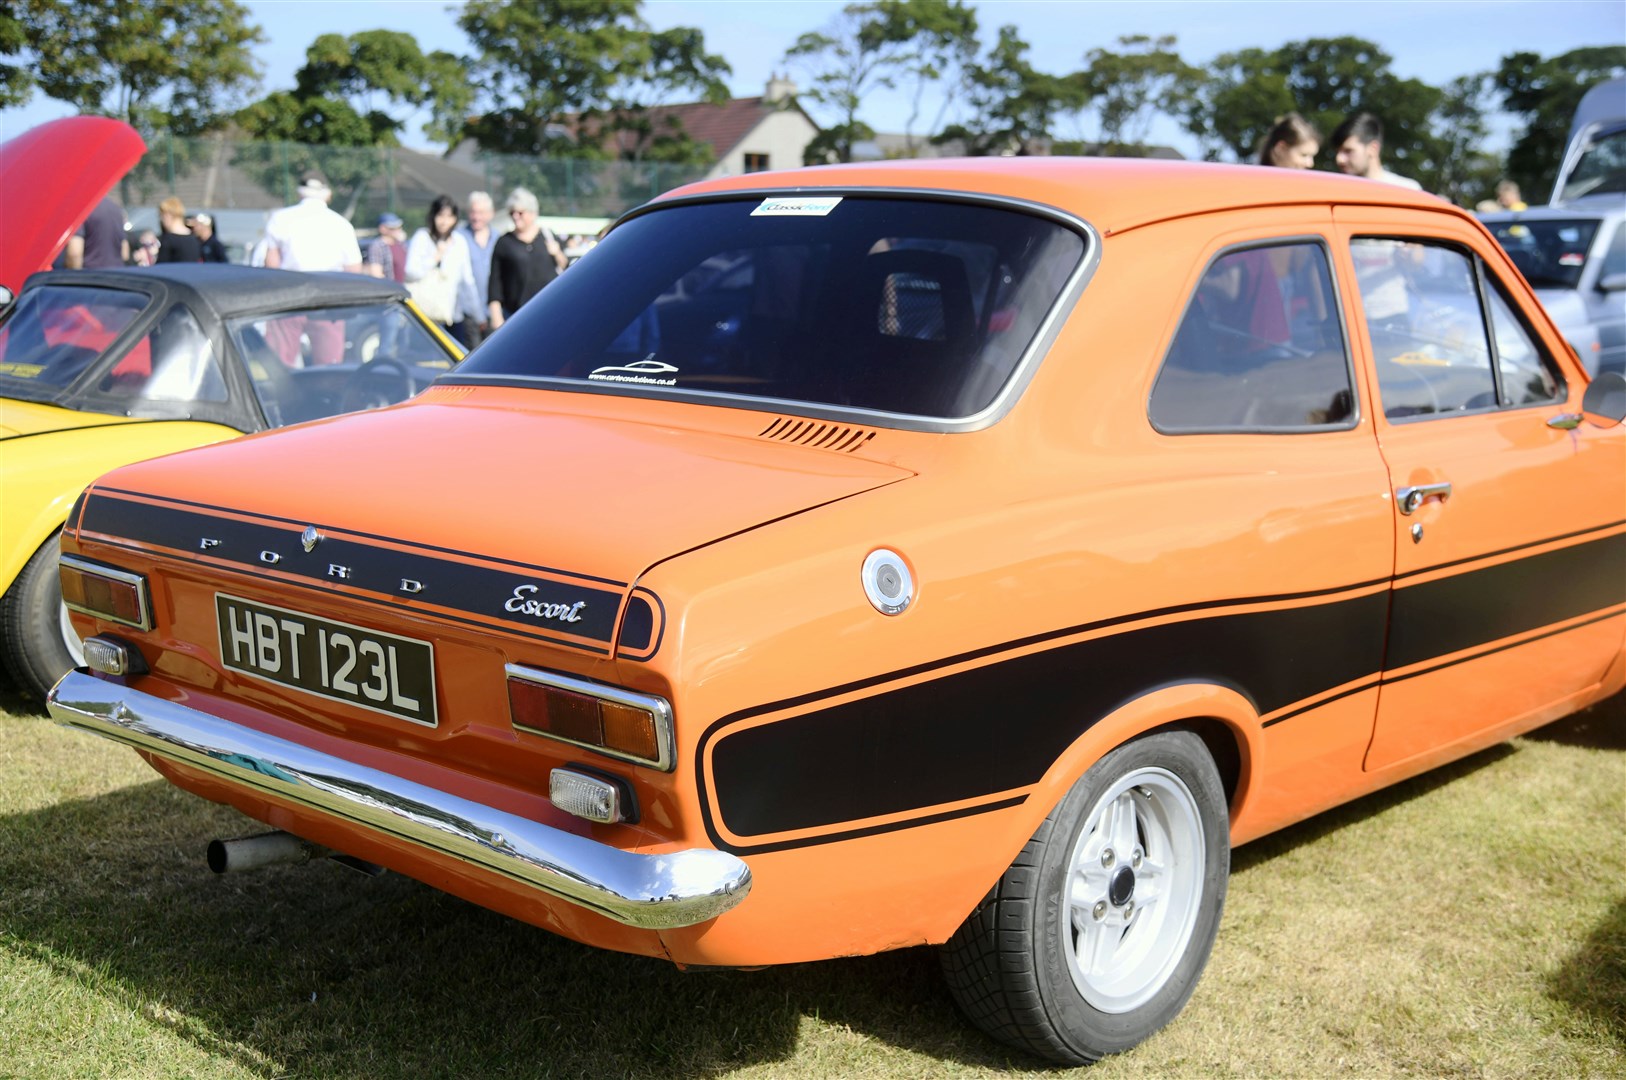 This Ford Escort attracted a lot of attention at the 2022 show. Picture: Beth Taylor